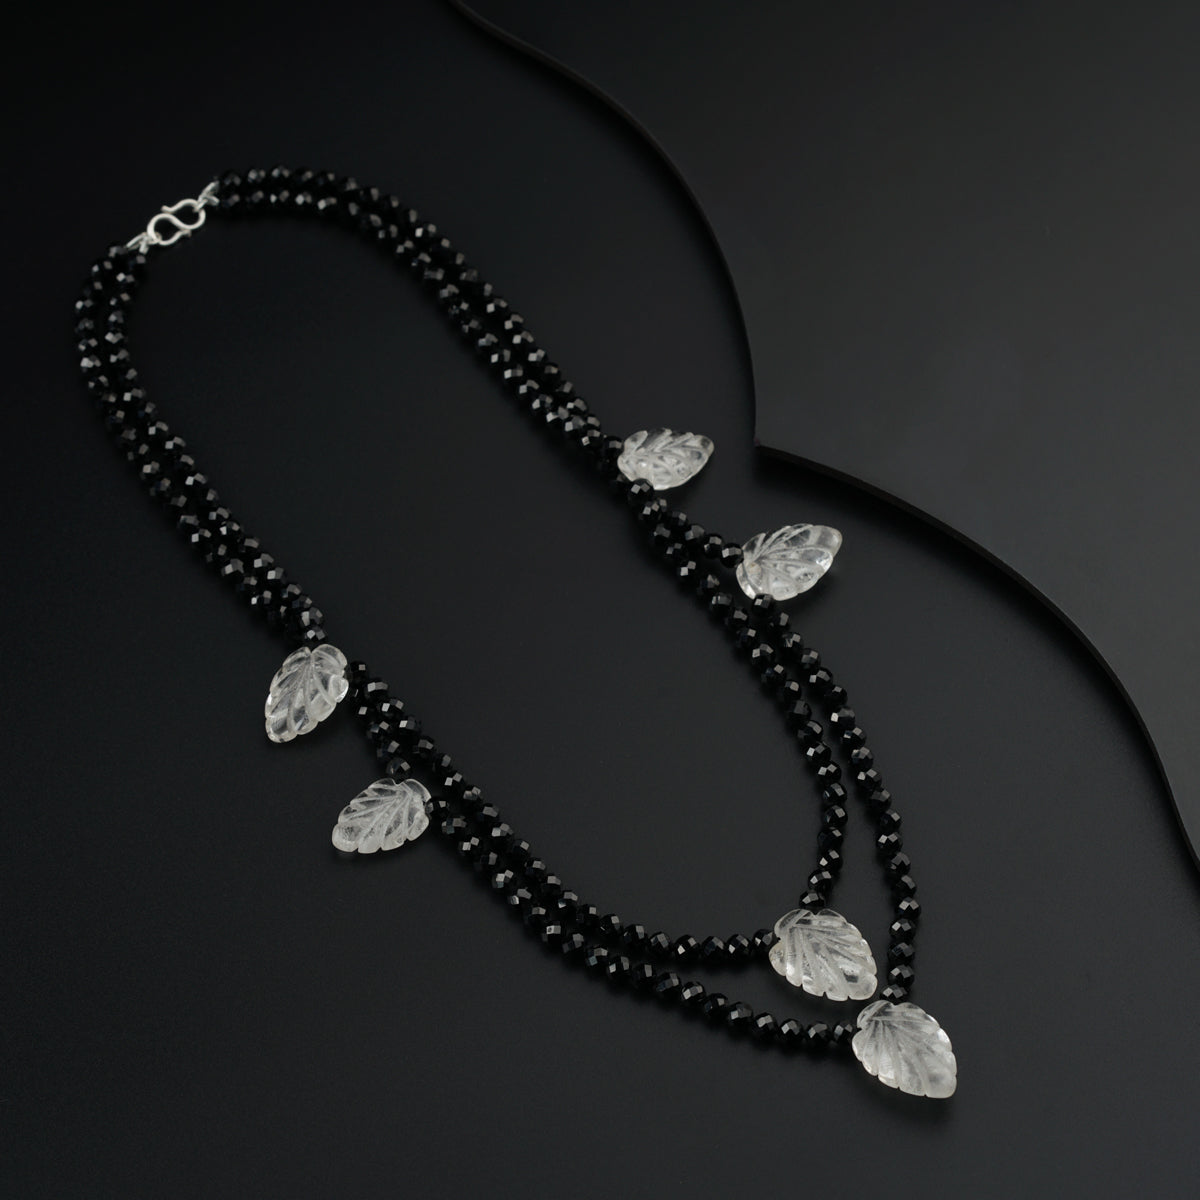 a black beaded necklace with clear stones